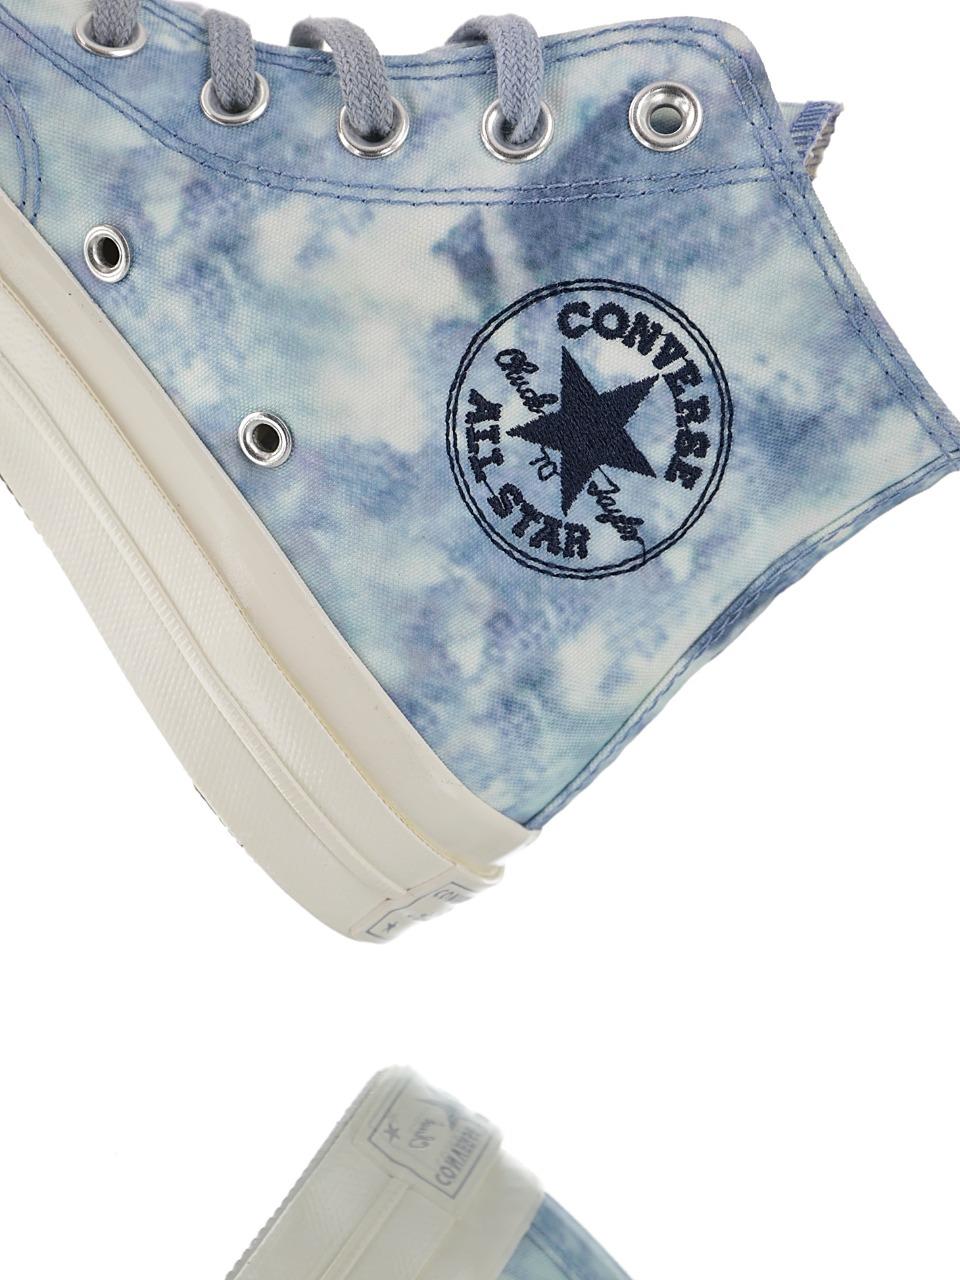 Converse Chuck Taylor All Star 1970s - whatever on 